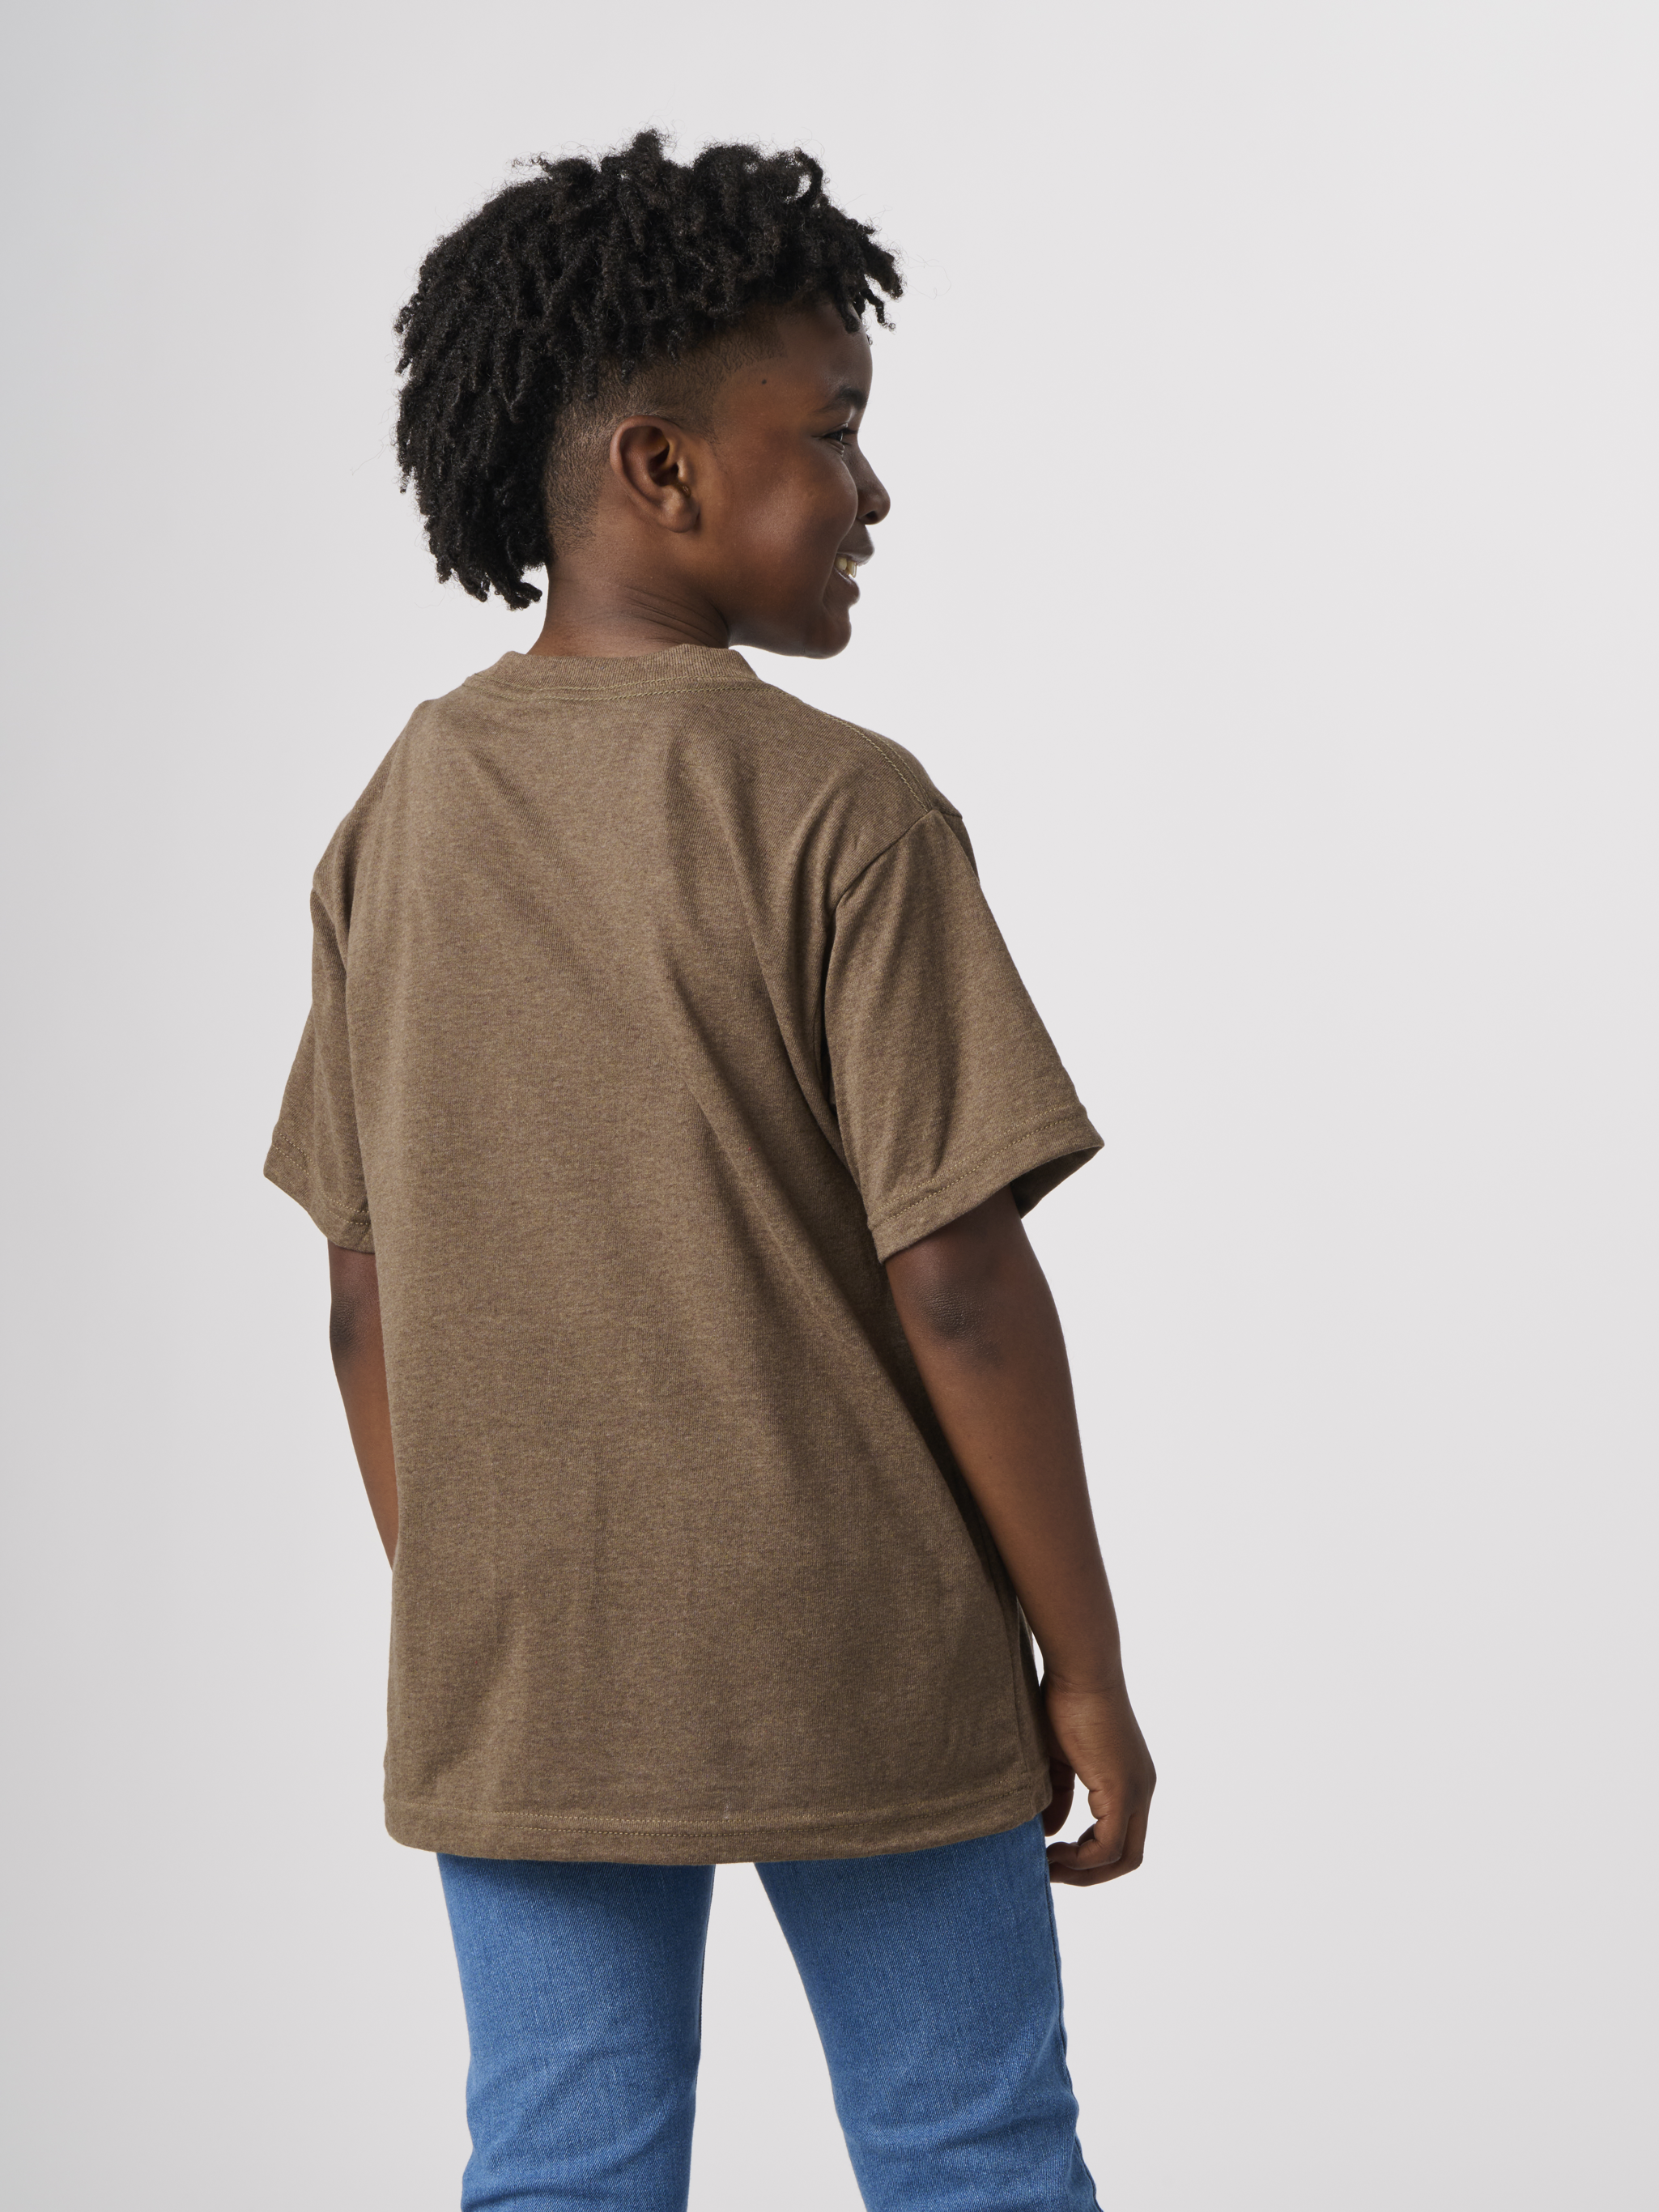 RECOVER_RY100_YOUTHCLASSICSHORTSLEEVETSHIRT_BETTERBROWN_BACK.png